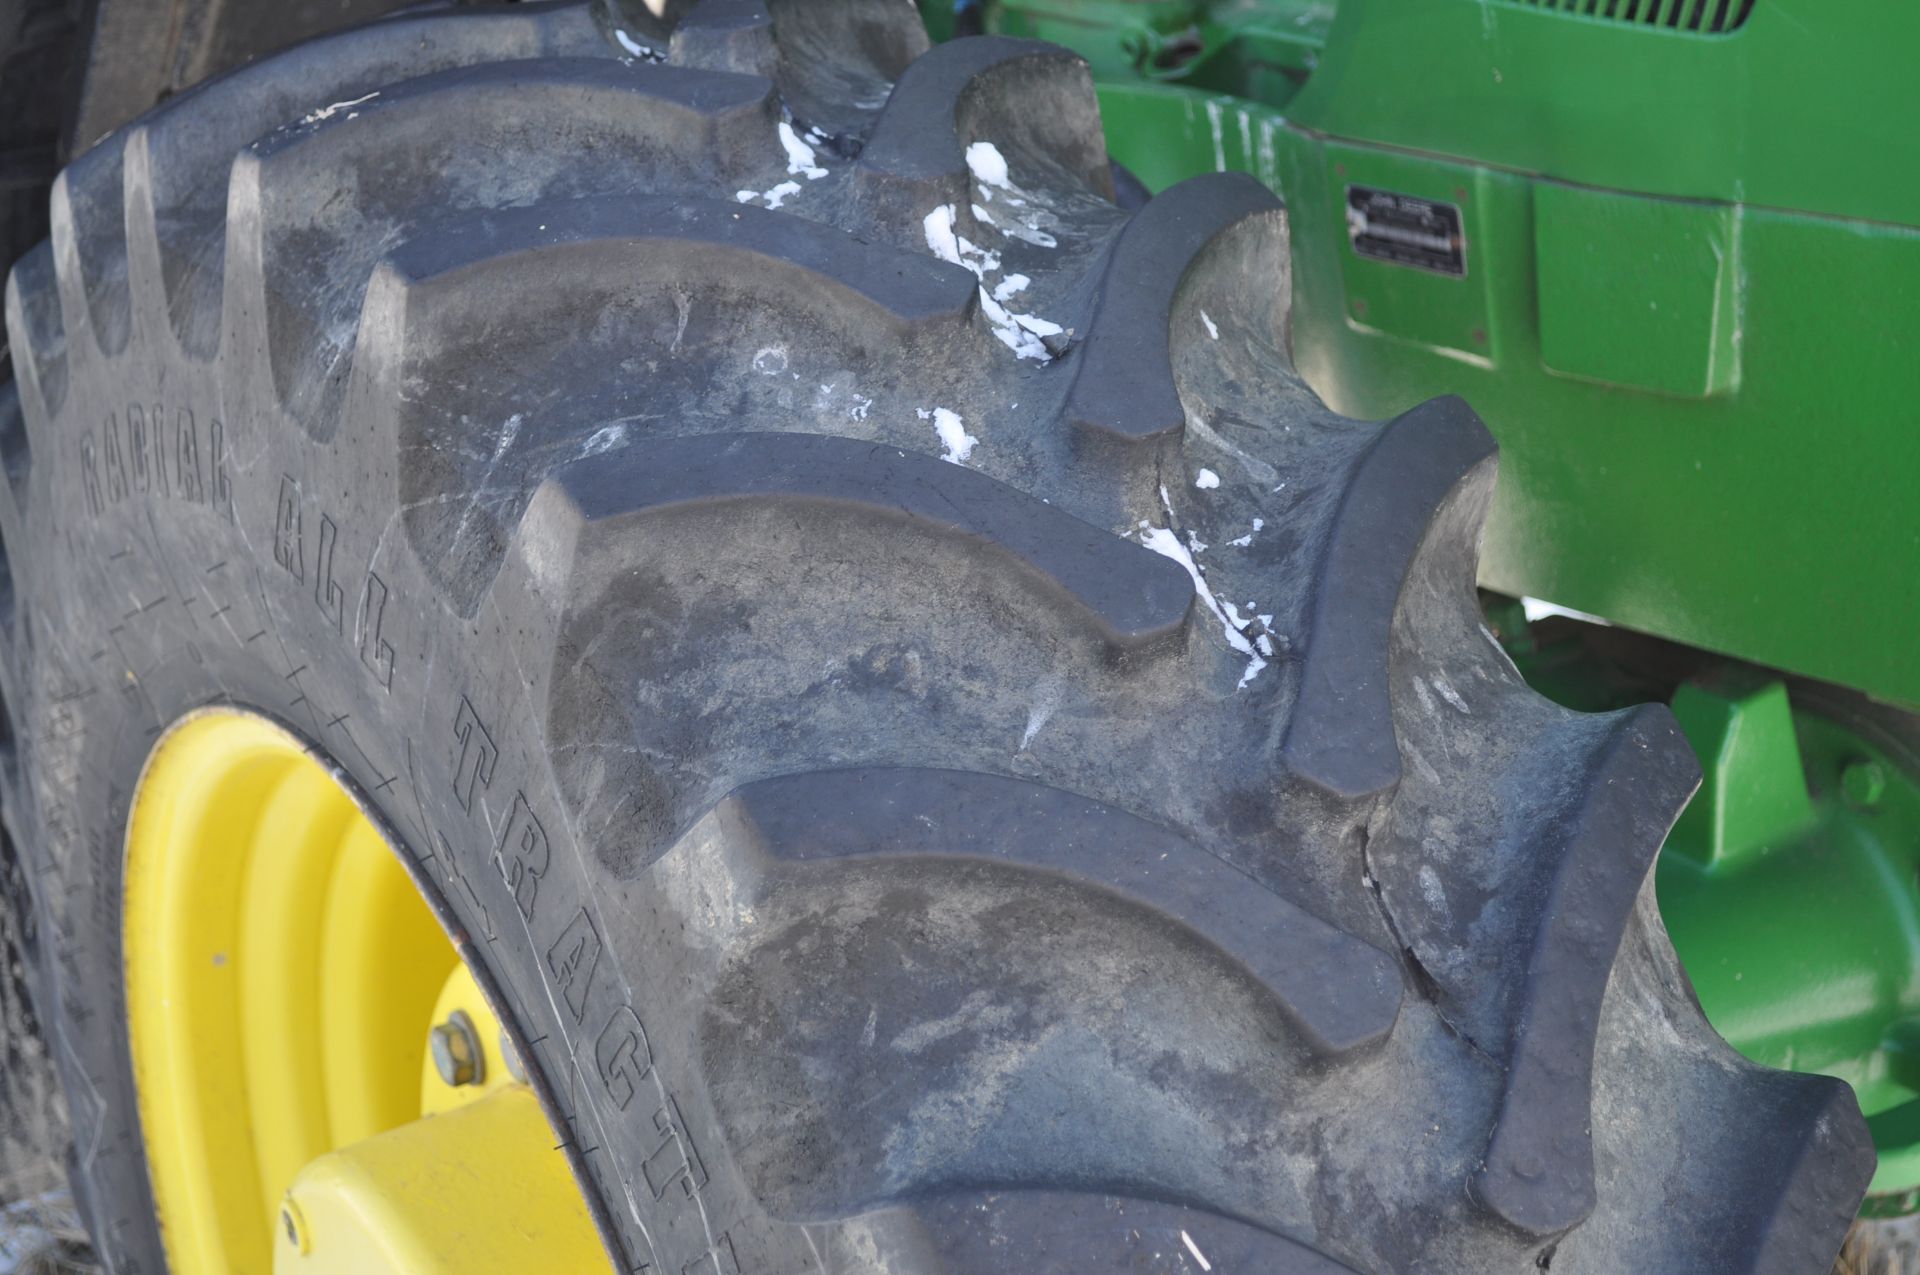 John Deere 7920 tractor, MFWD, IVT, 480/80R42 rear duals, 380/85R30 front, front fenders, front wts, - Image 10 of 33